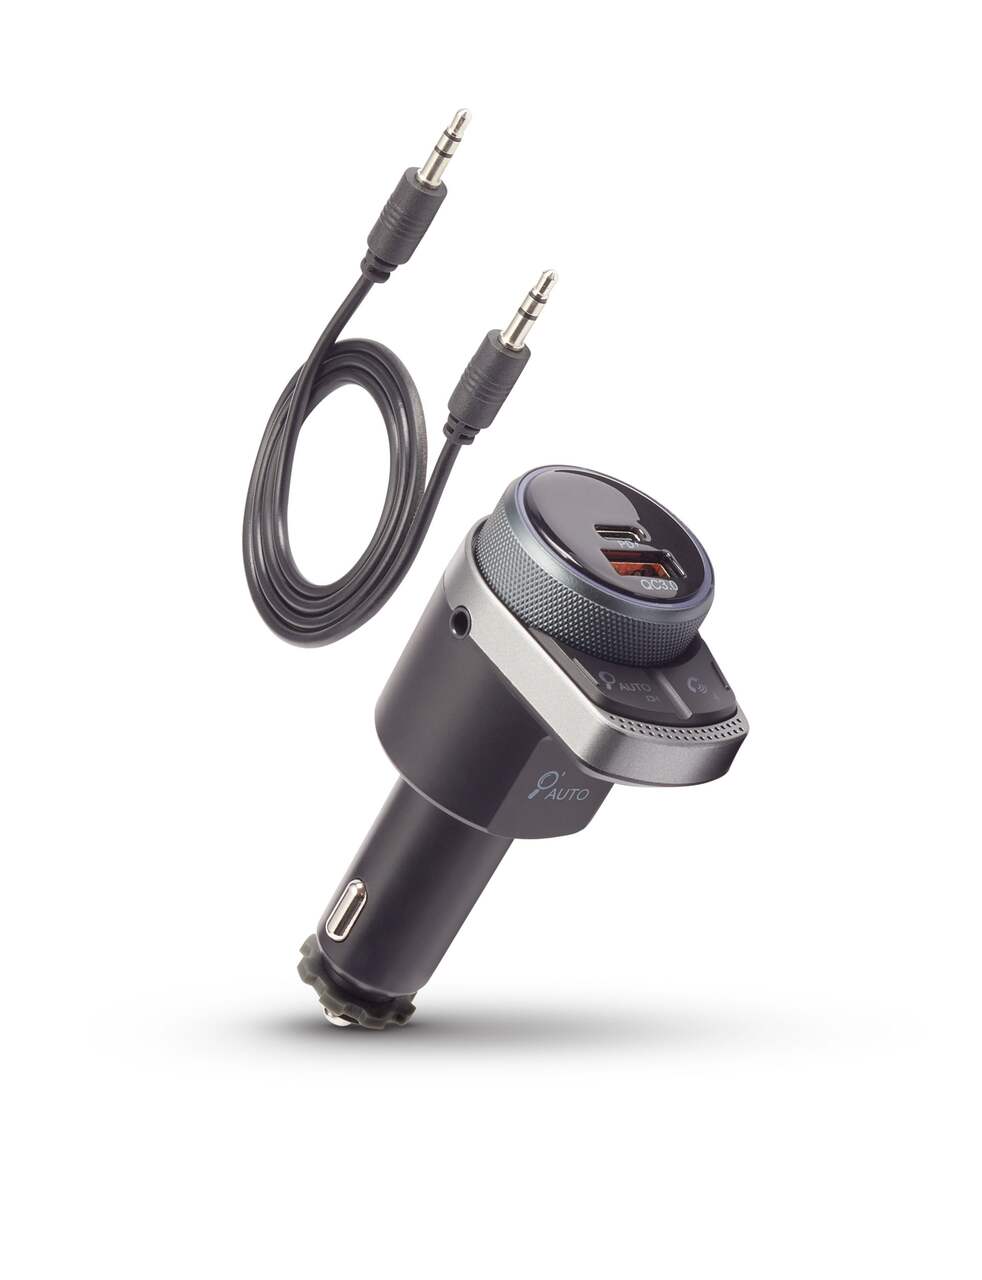 Top 5 Best Bluetooth FM Transmitter for Any Car 